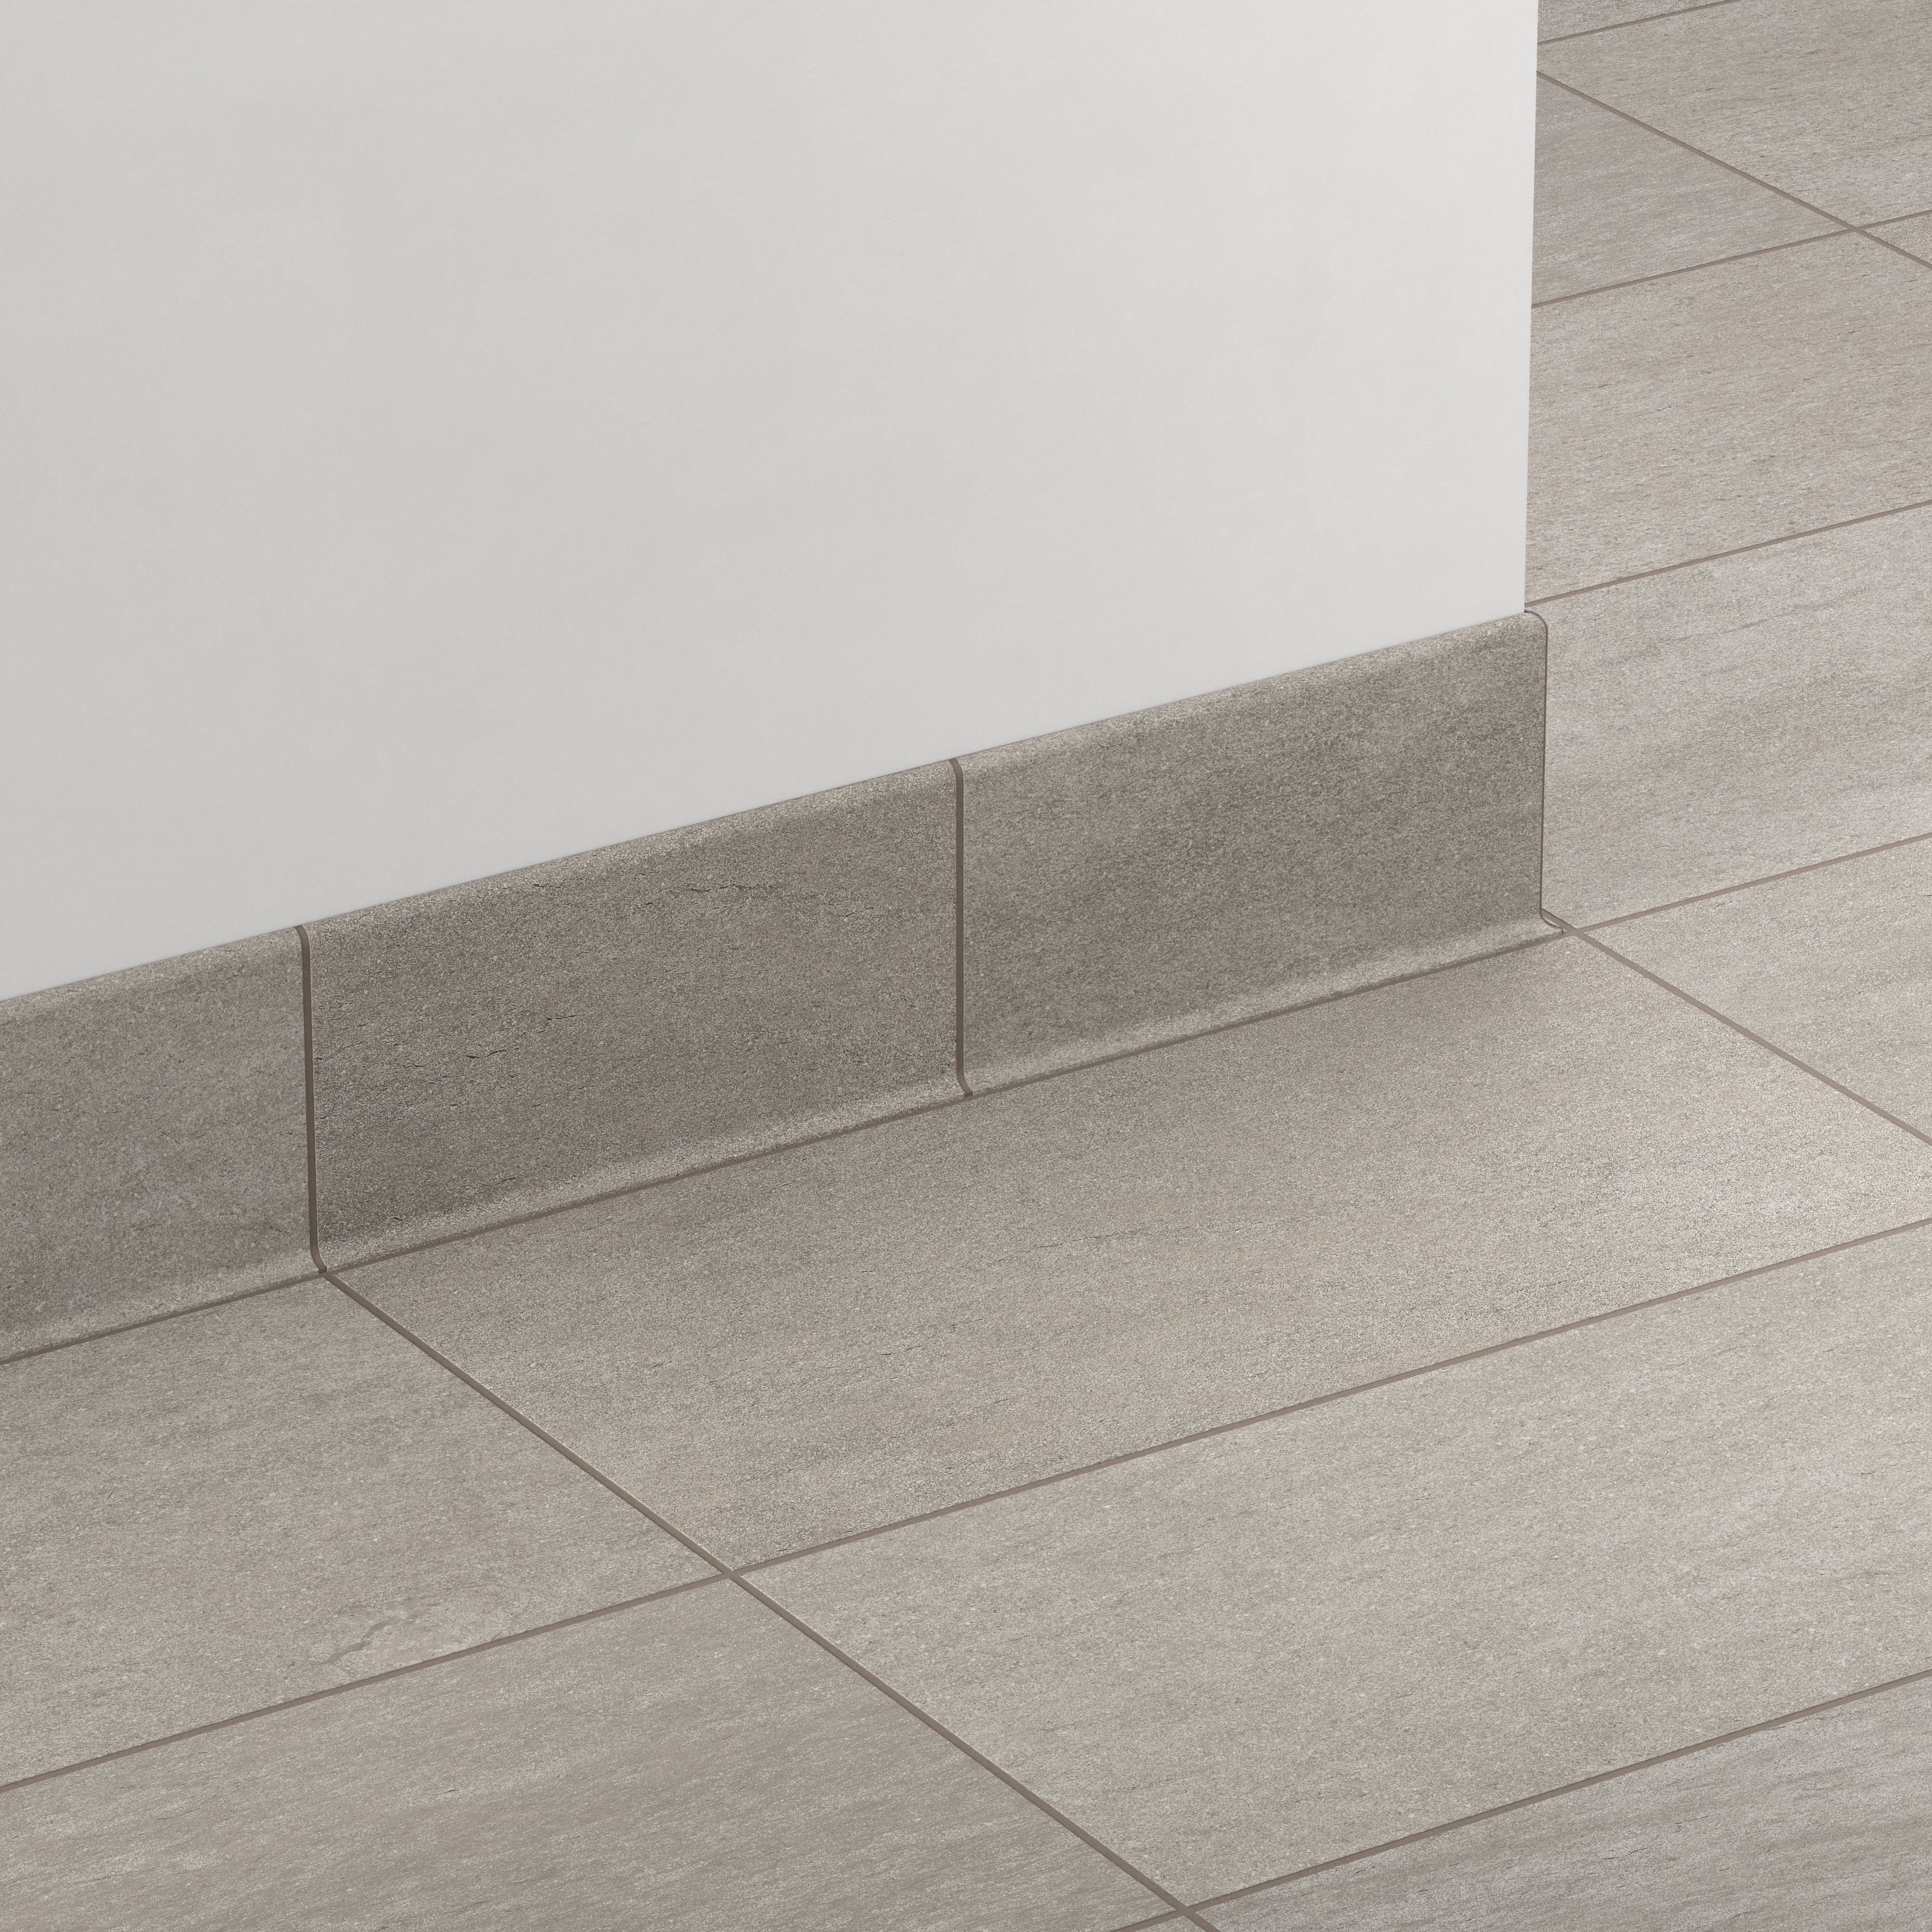 Brody 6x12 Matte Porcelain Cove Base Tile in Sienna